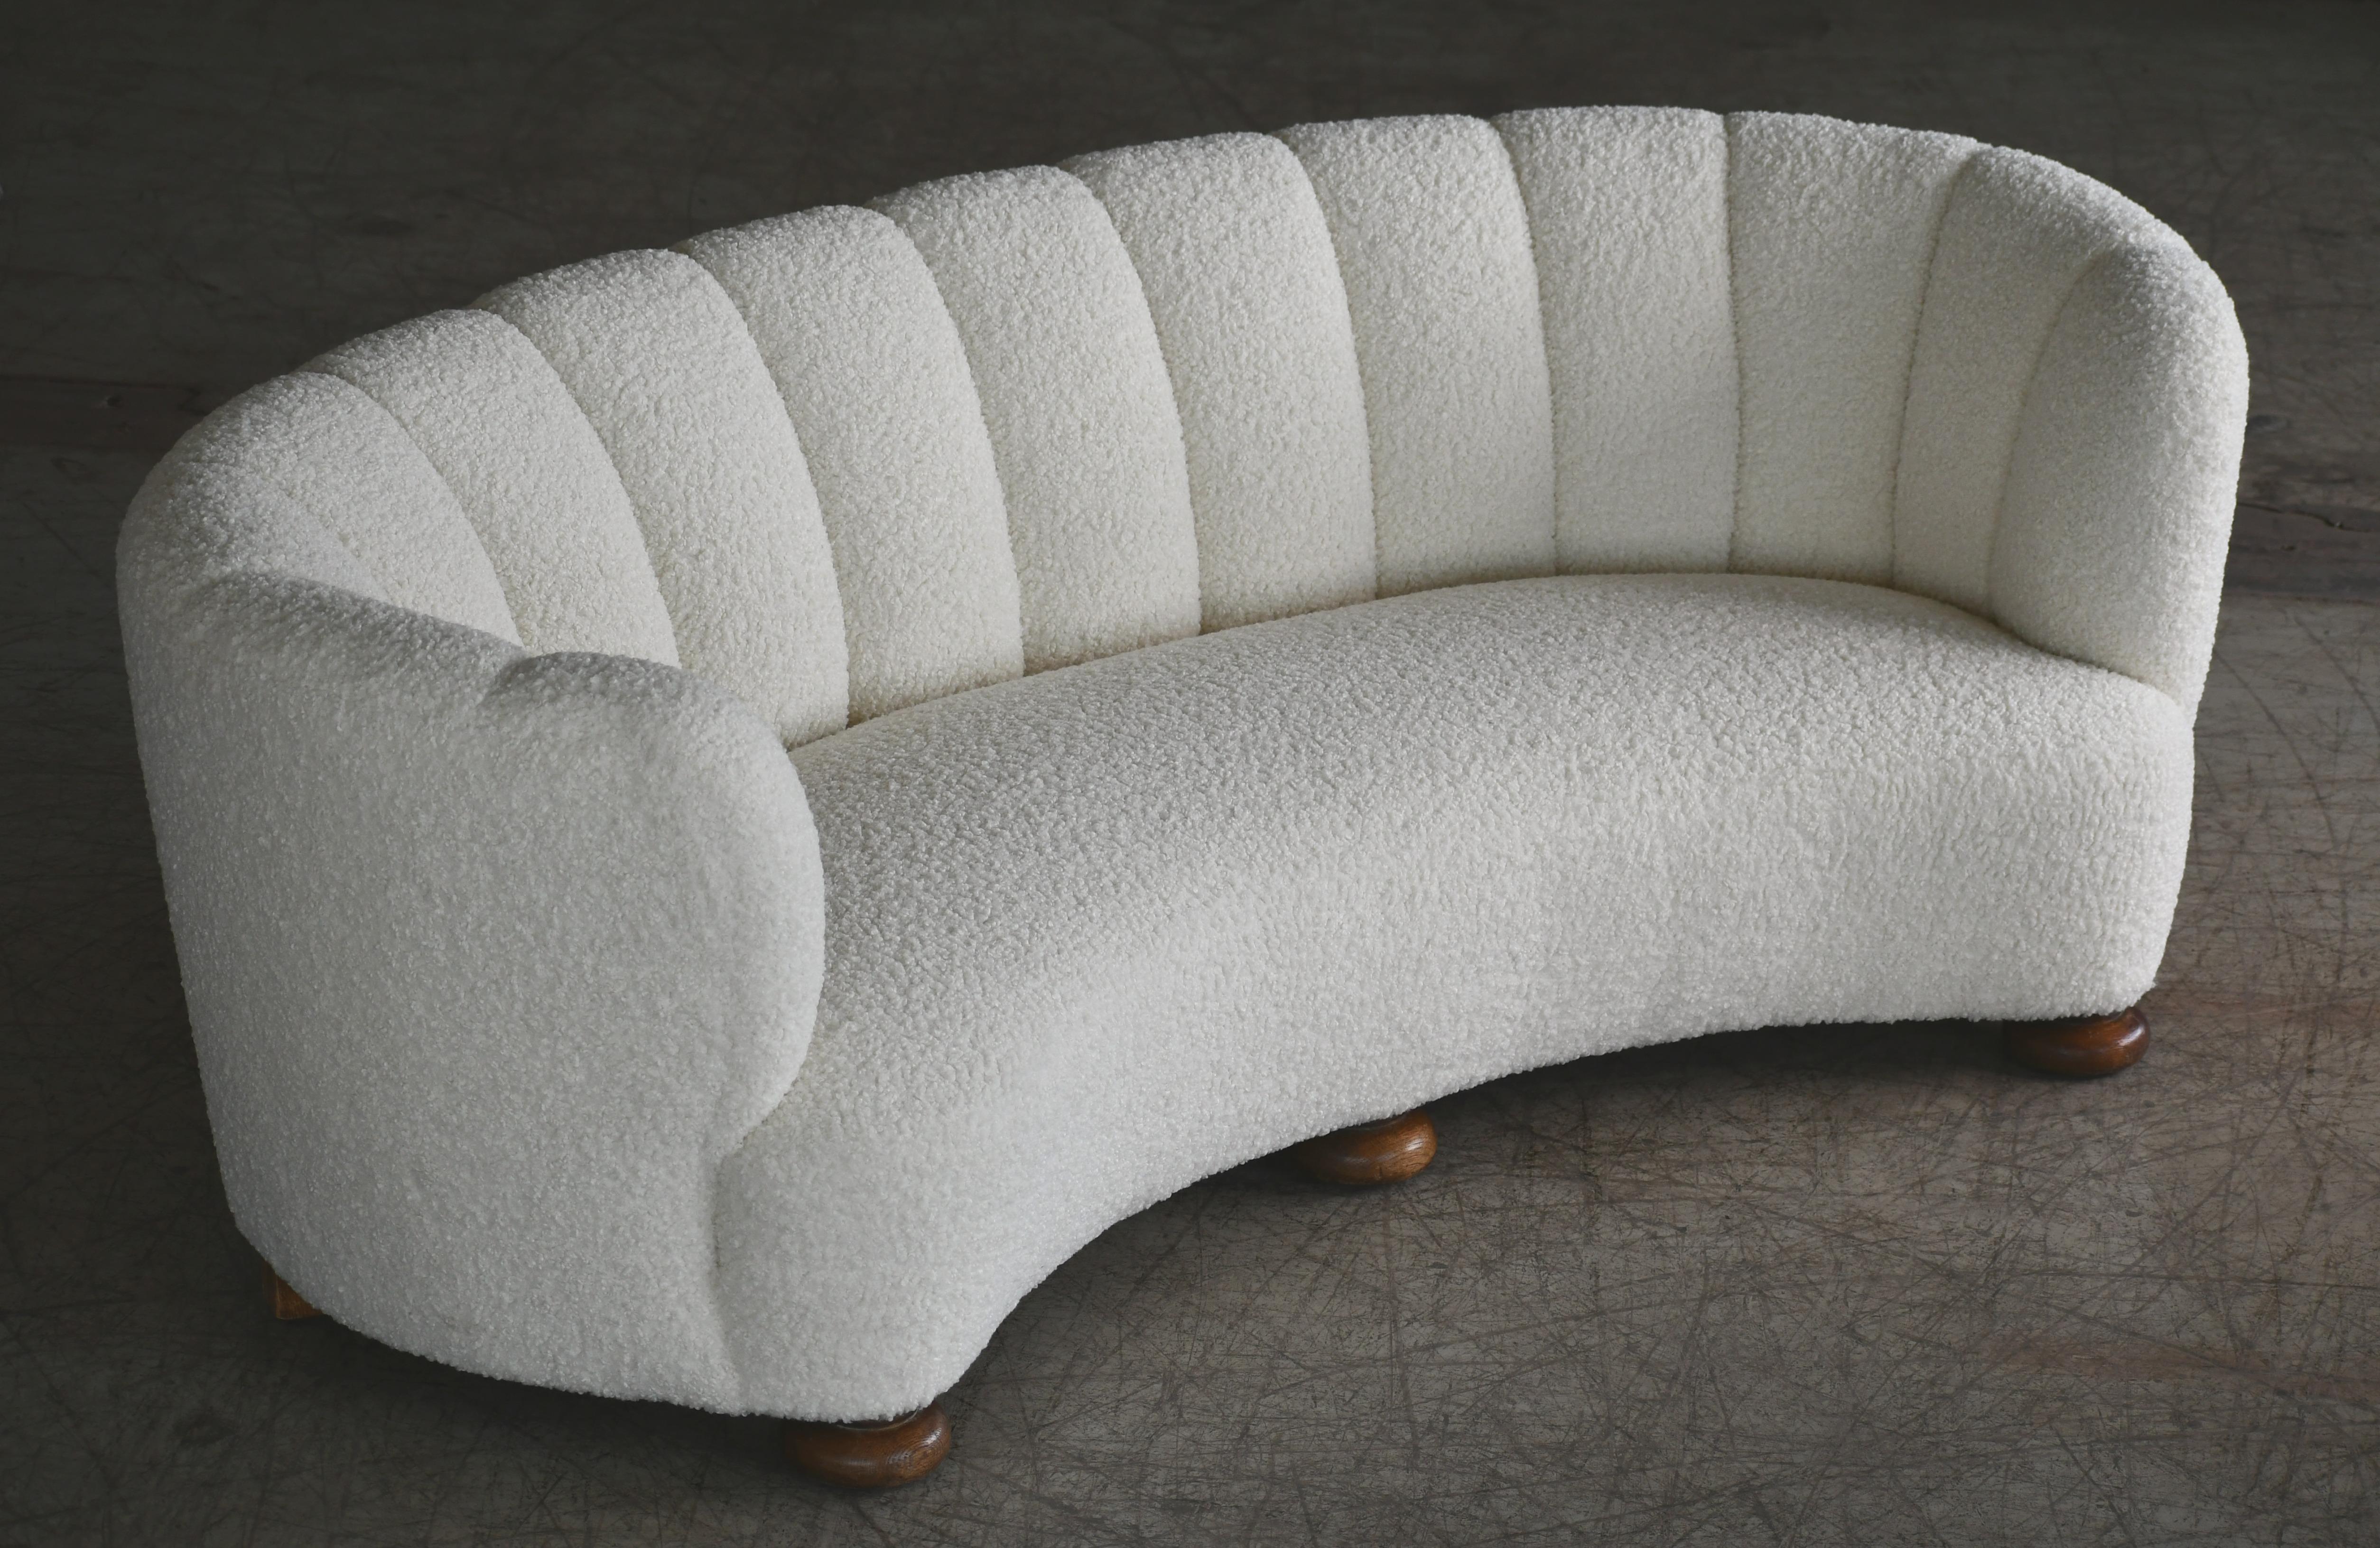 Danish 1940s Large Curved Banana Shape Sofa Newly Re-Upholstered in White Boucle 1